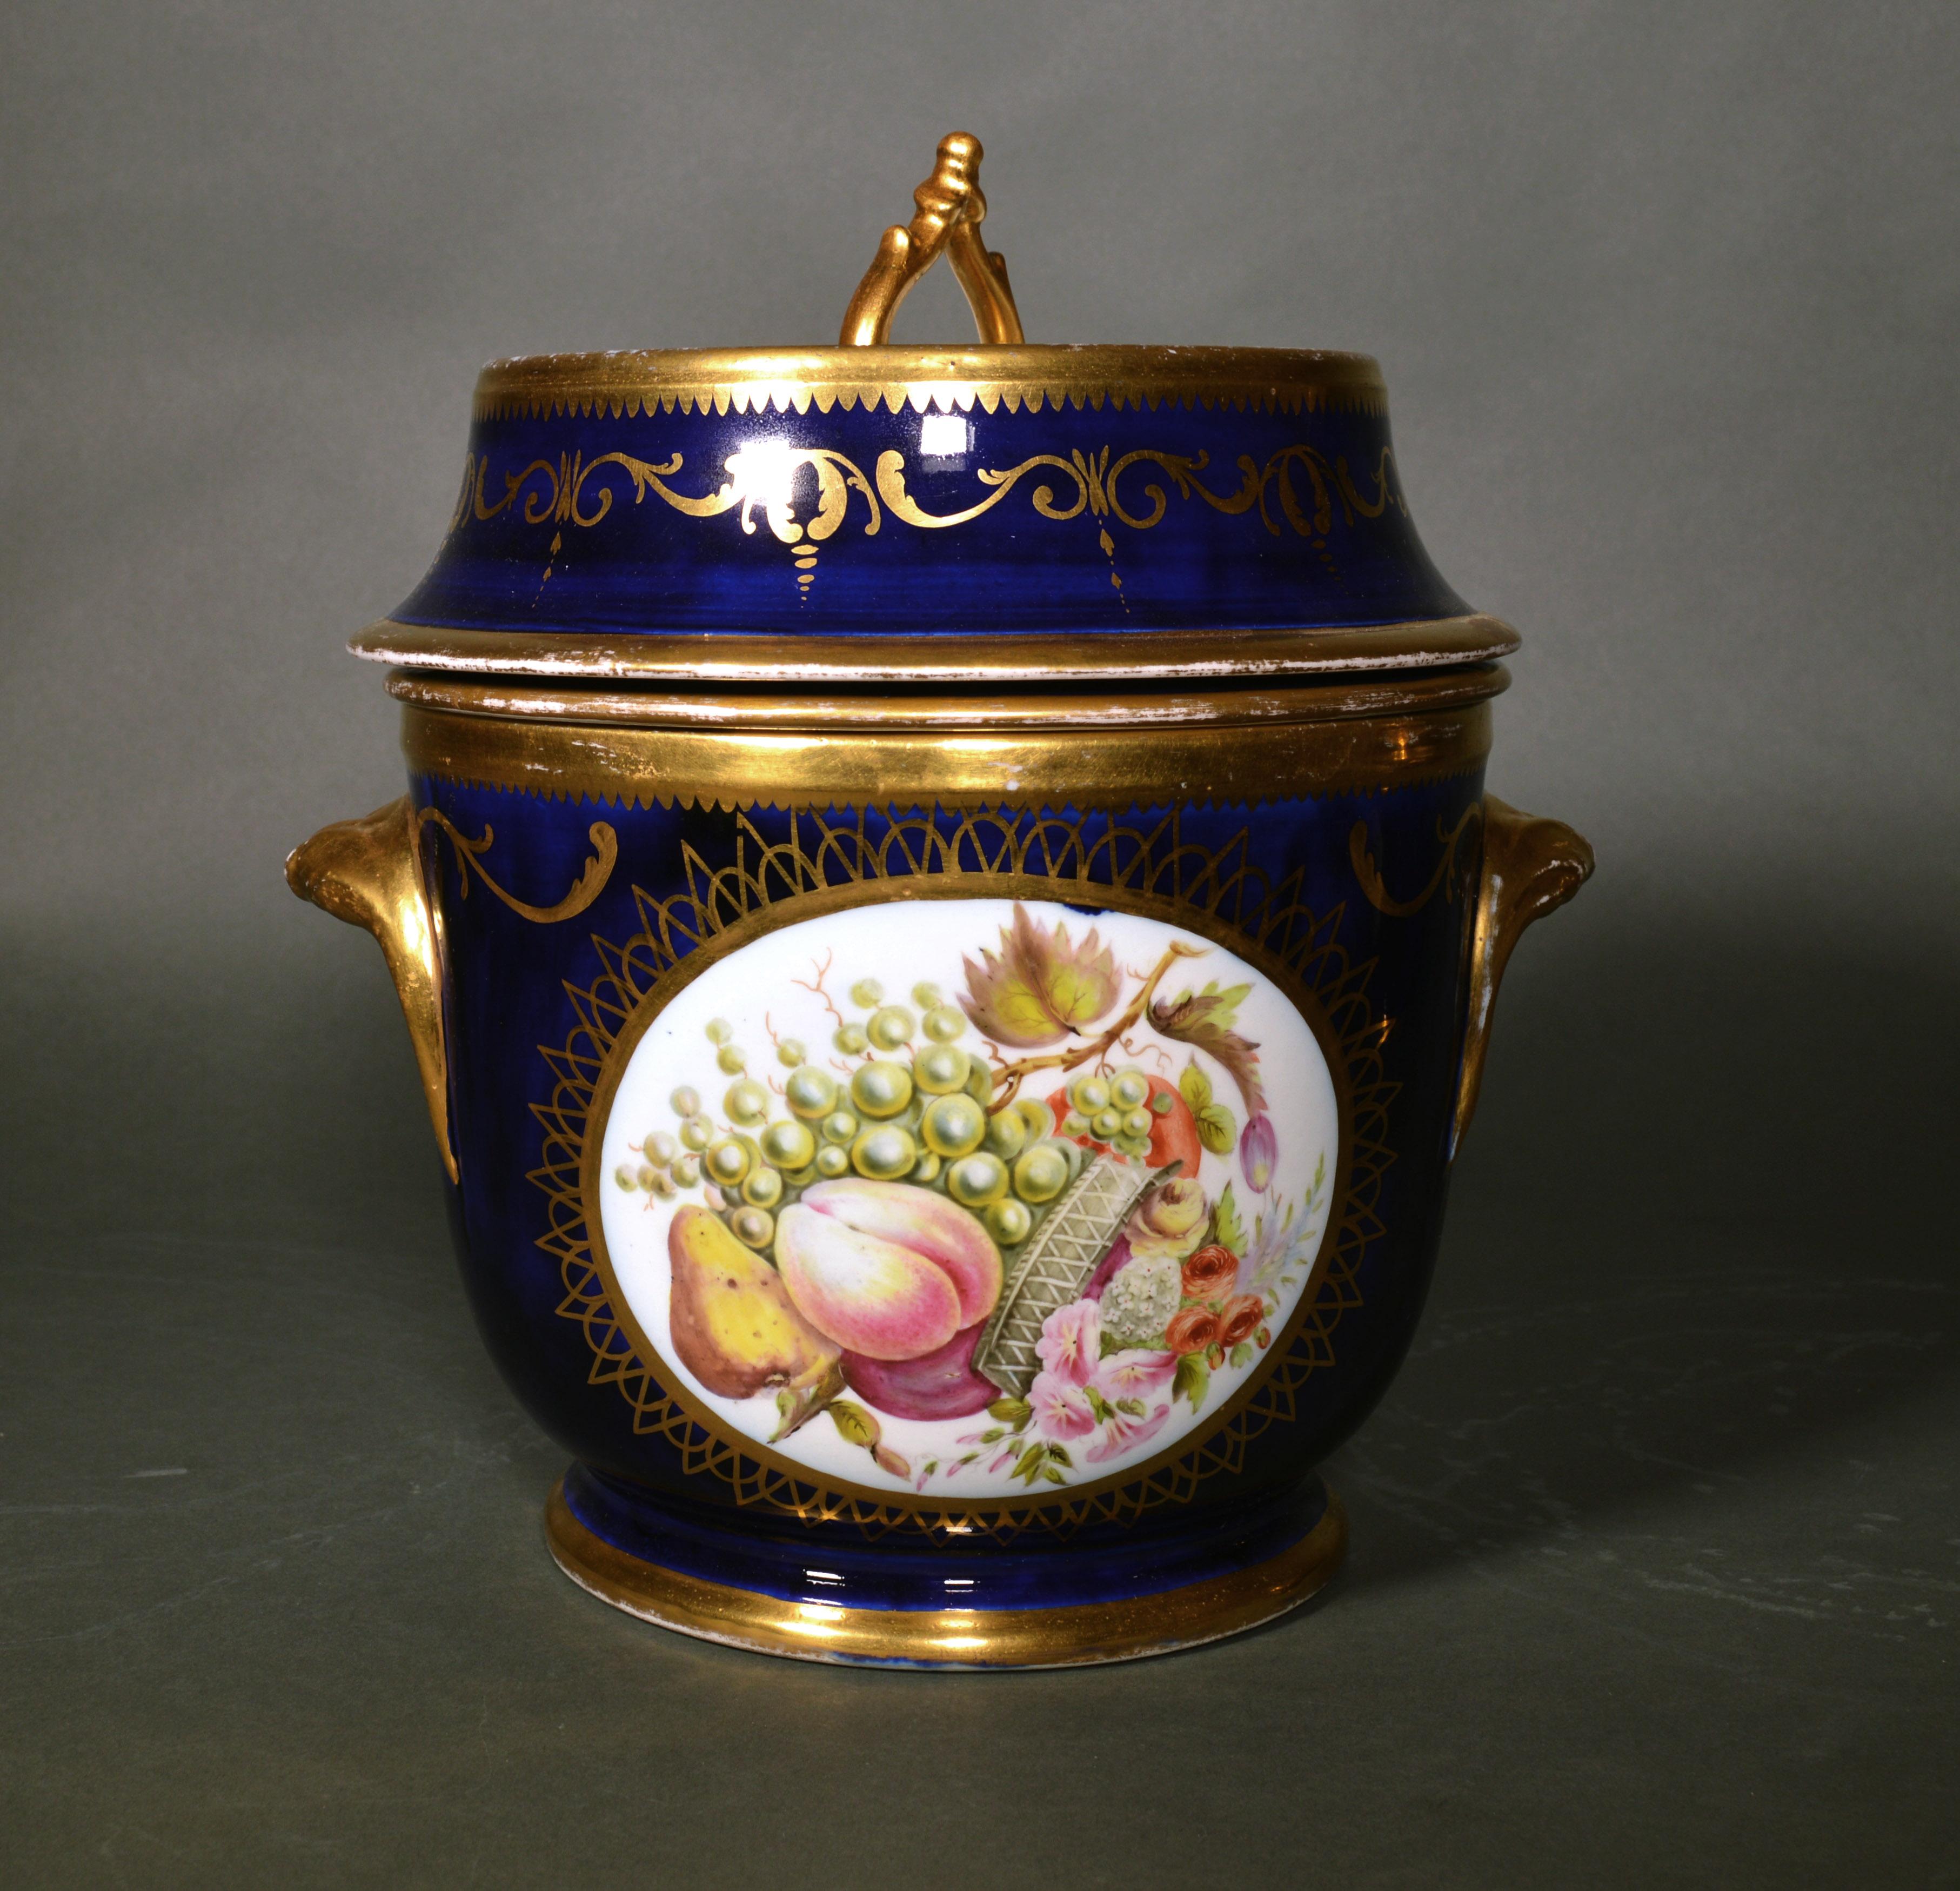 19th Century English Porcelain Coalport Pair of Botanical Fruit Coolers, Covers, and Liners